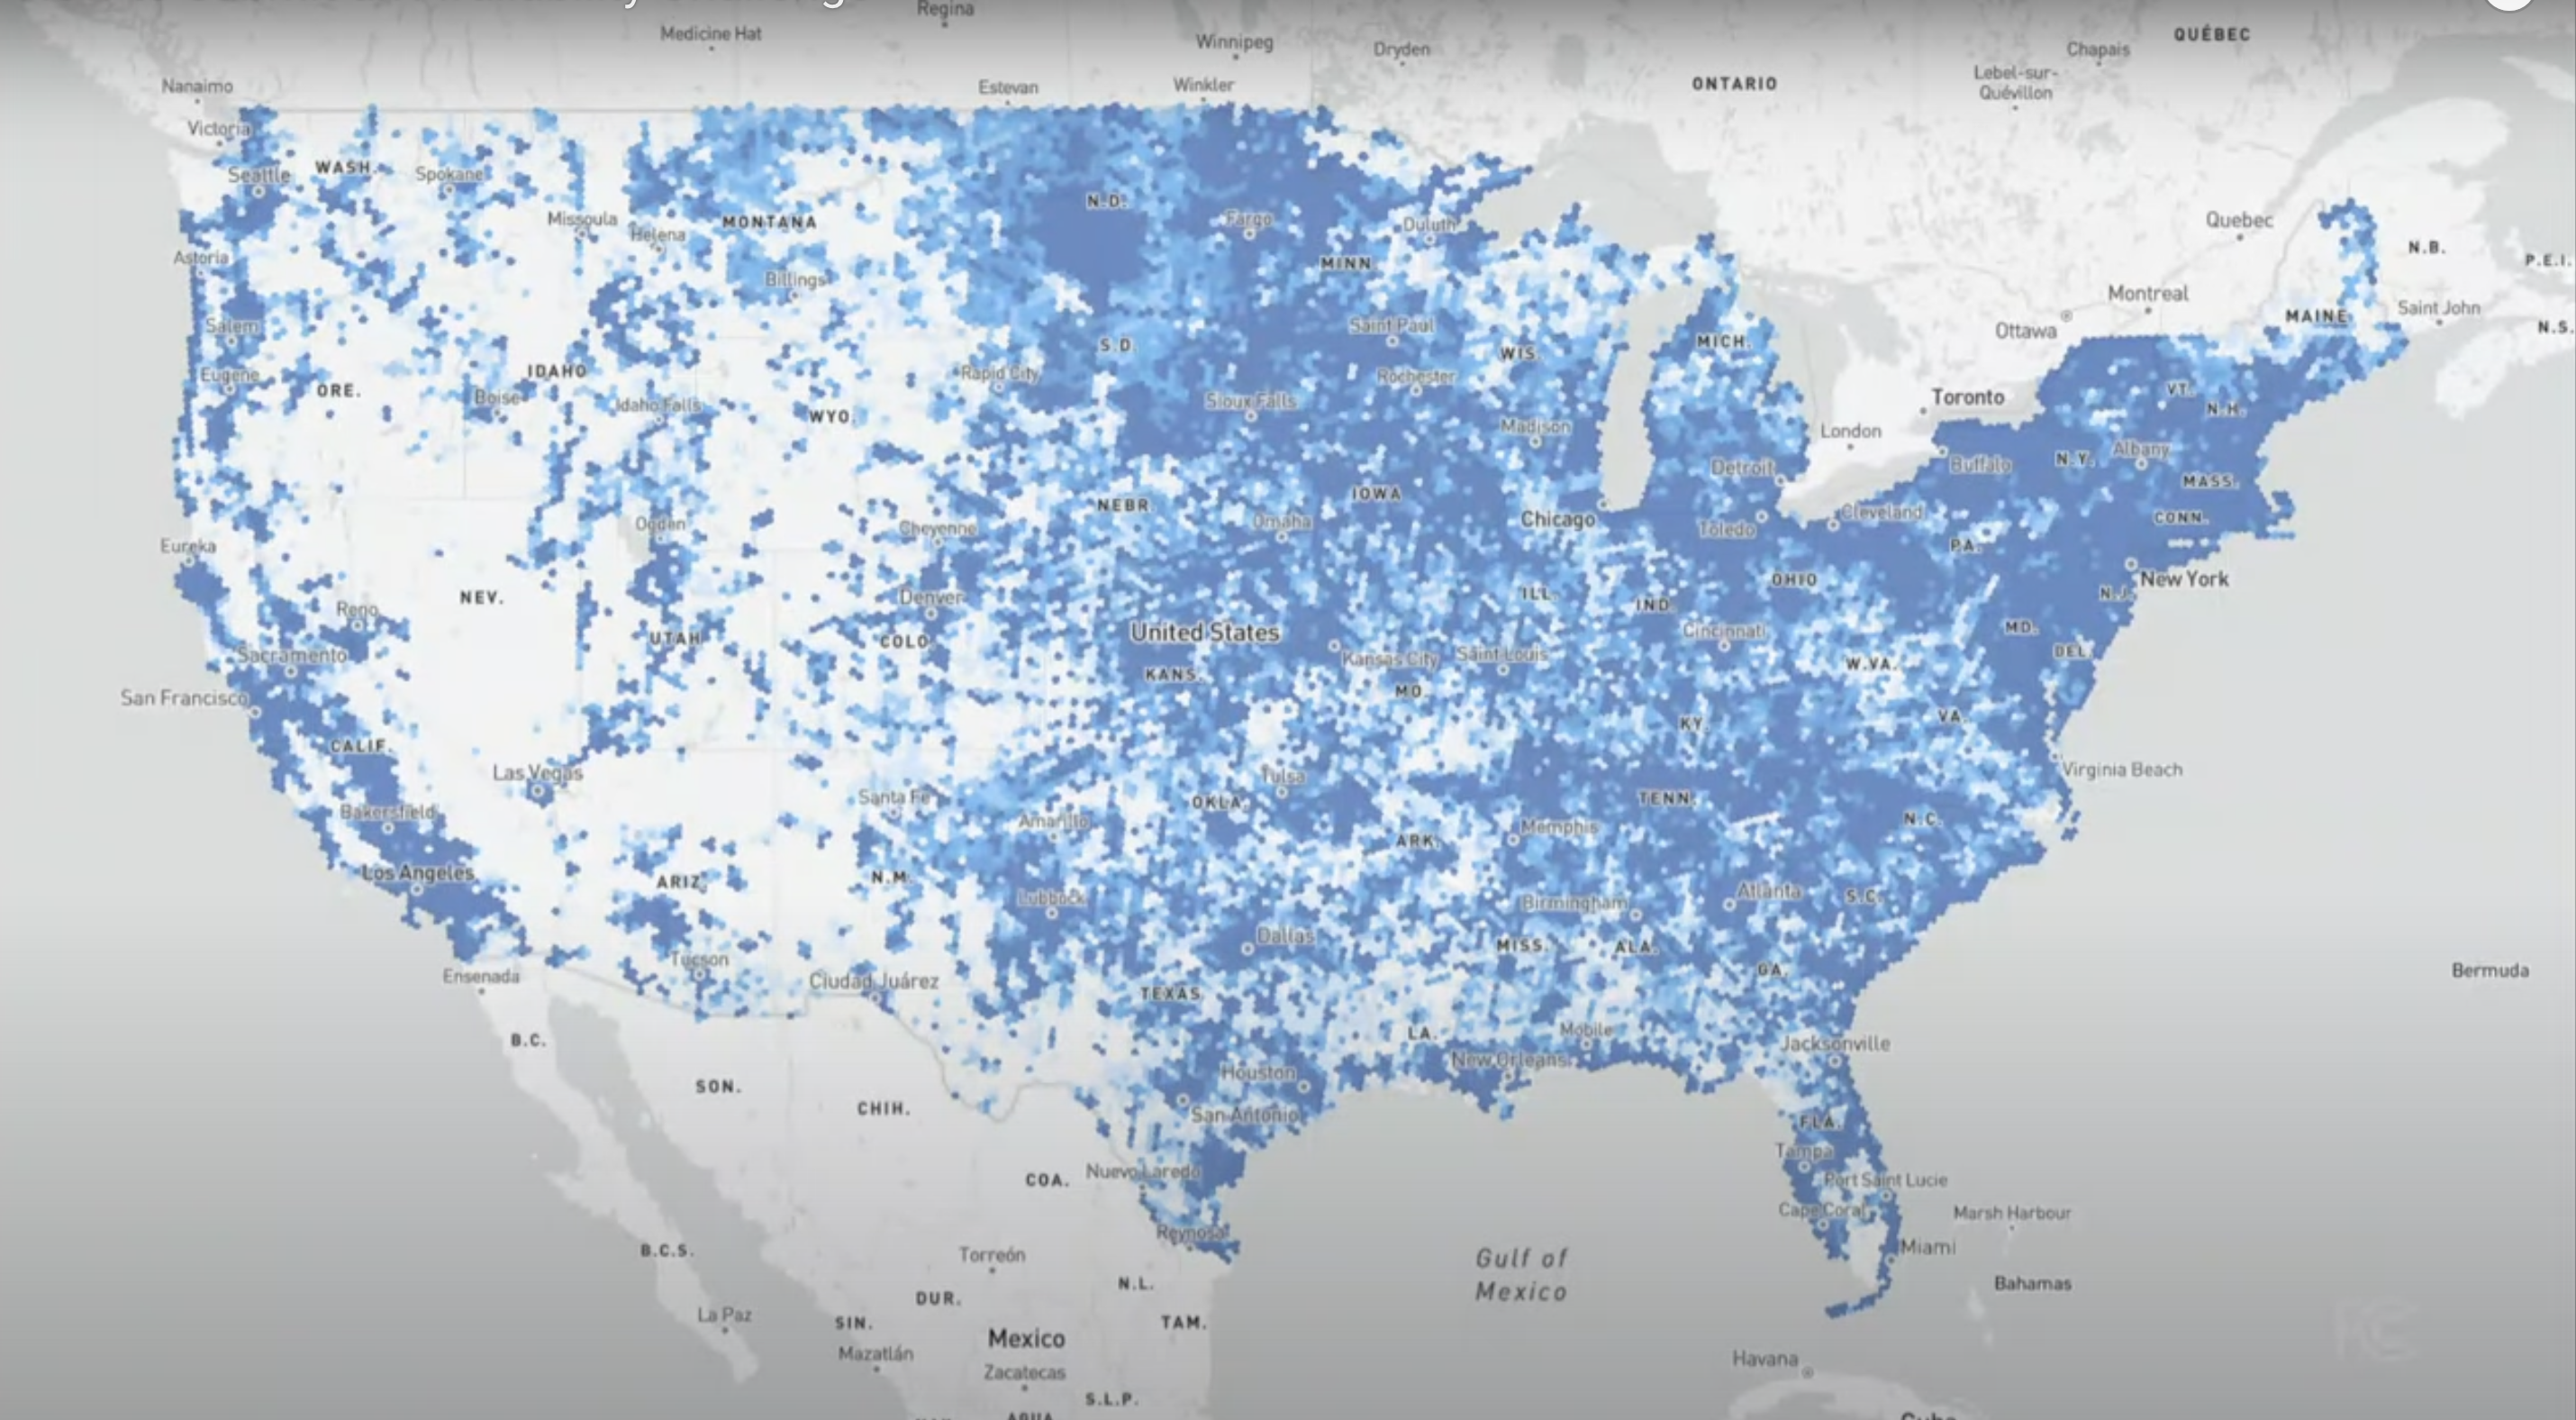 A map of broadband availability in the United States